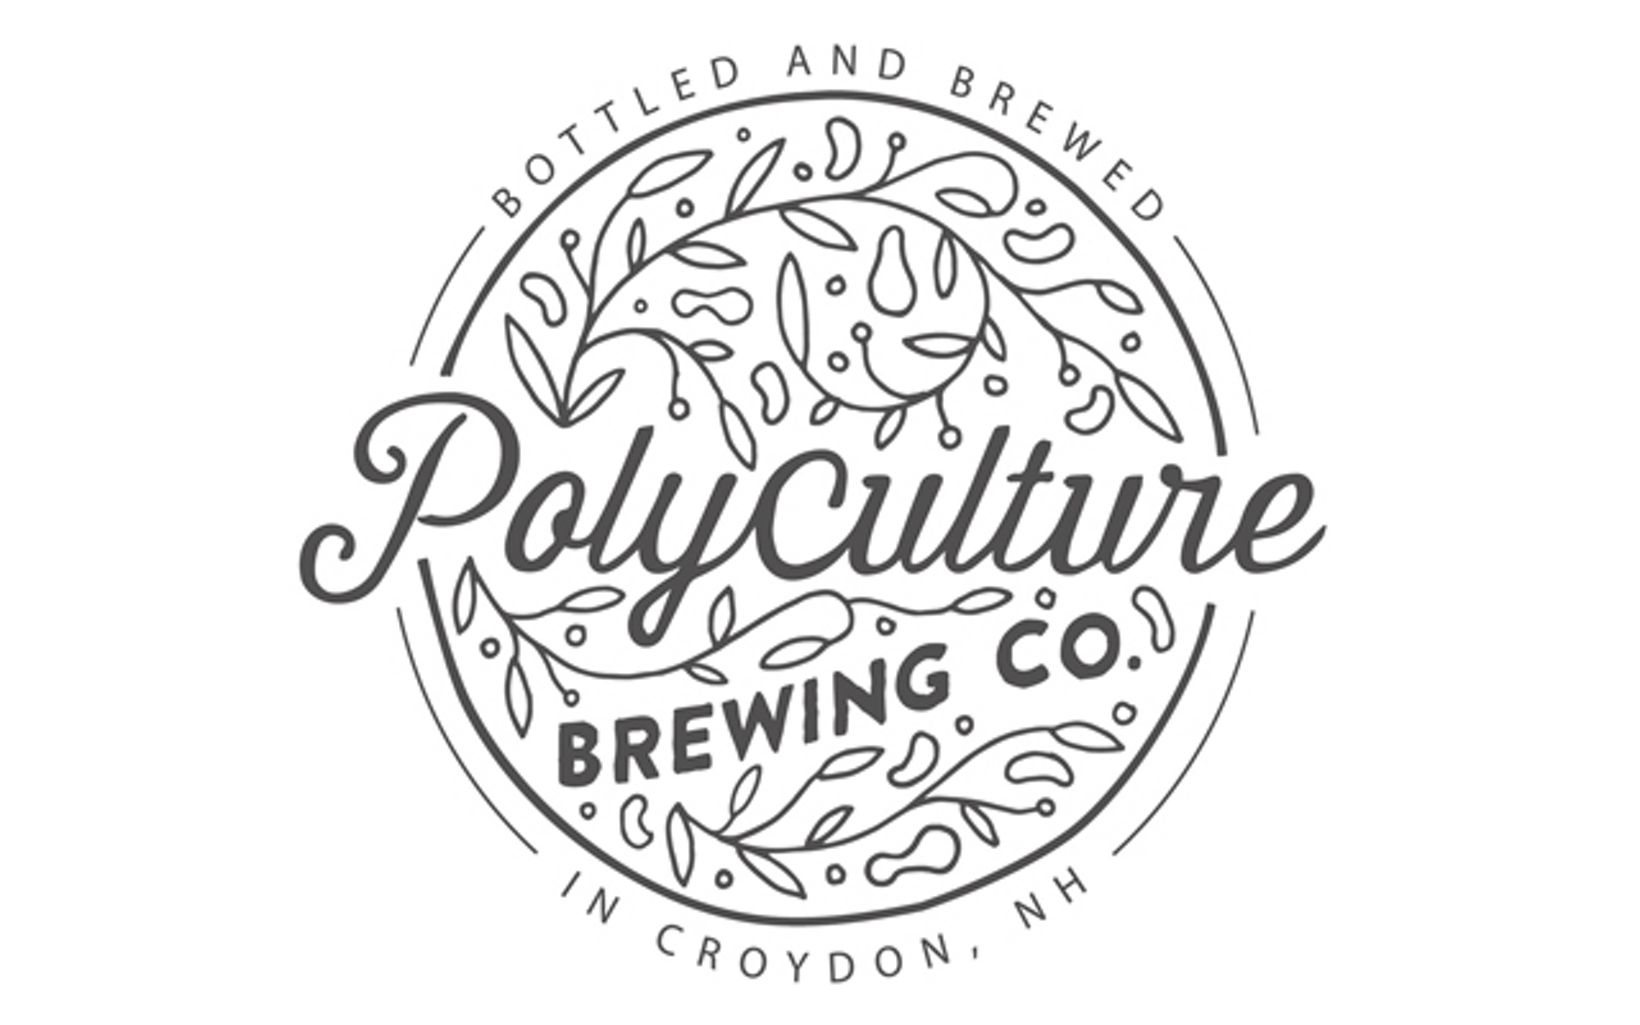 Polyculture Brewing Company OktoberForest partner brewery located in Croydon, New Hampshire © Polyculture Brewing Company